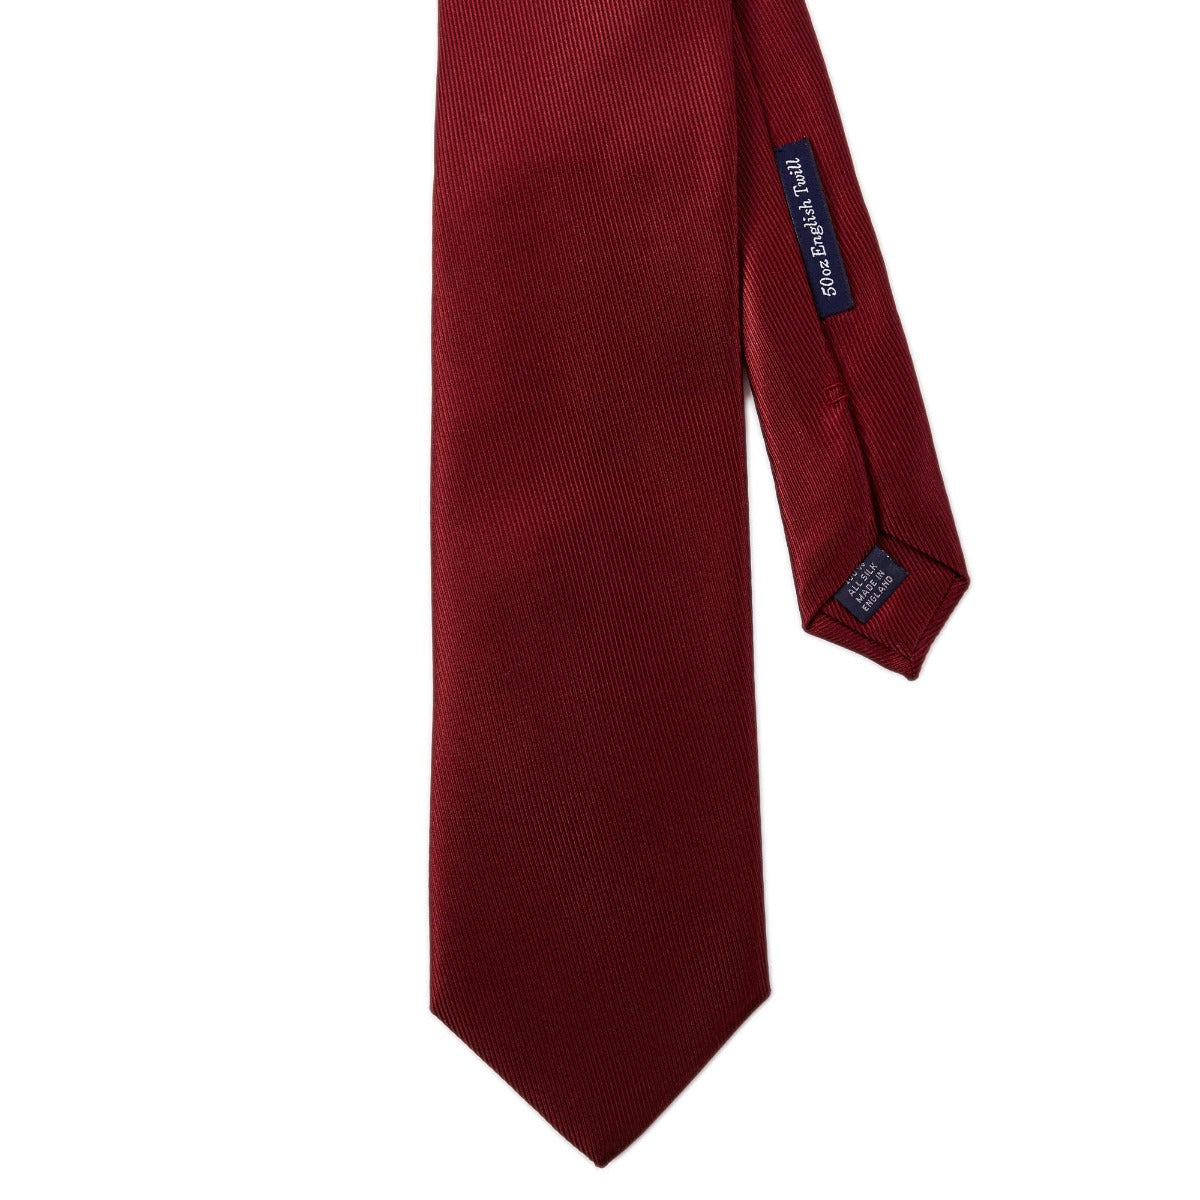 A Sovereign Grade 50oz Burgundy Horizontal Solid Twill Silk Tie by KirbyAllison.com, on a white background.